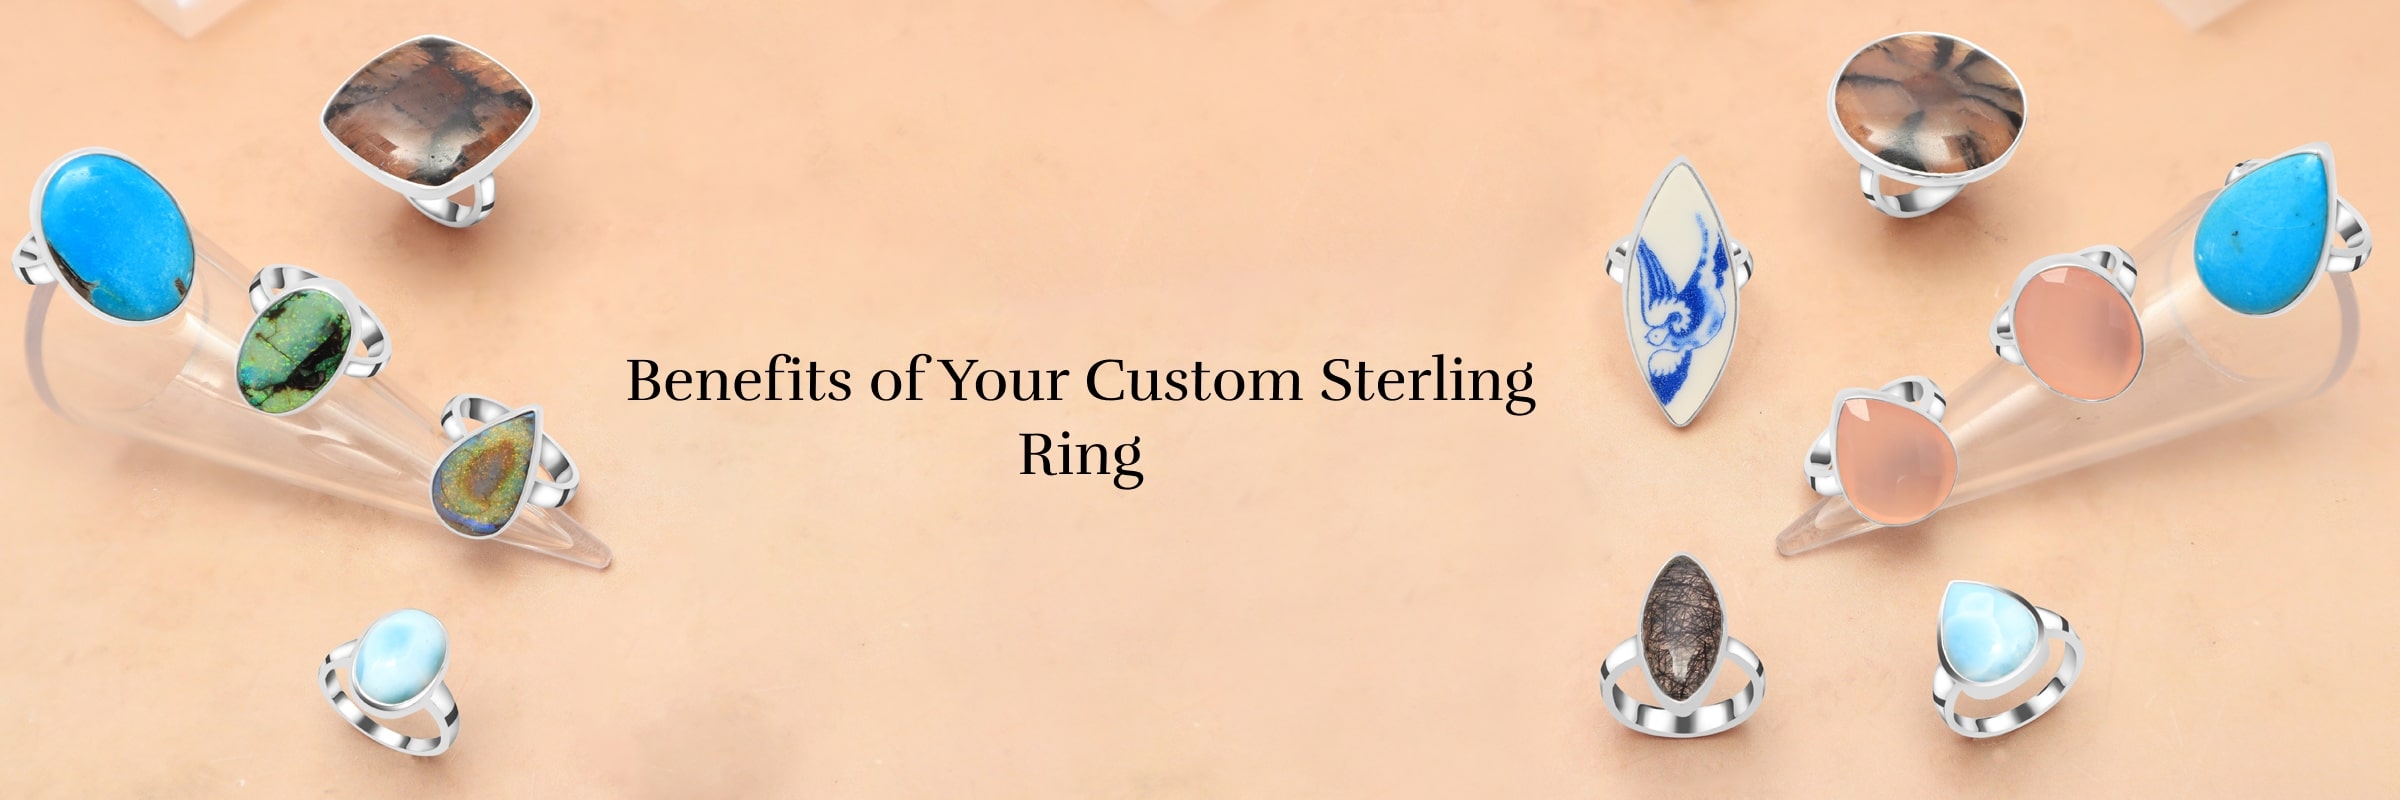 Customized Sterling Silver Ring and it's Benefits